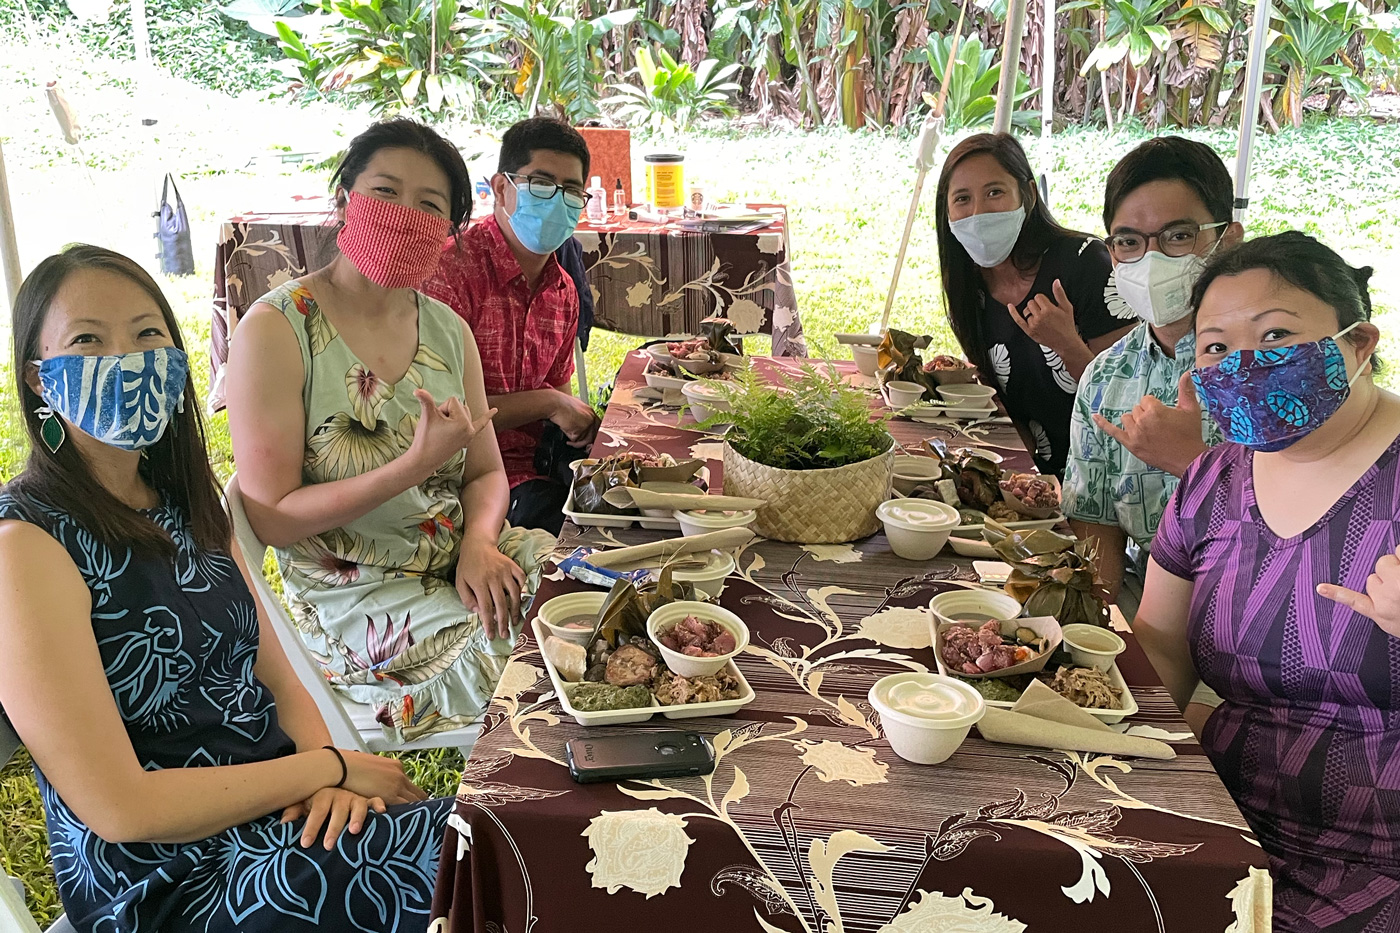 Hard work pays off! Getting ready to chow down at the PAʻI Foundation’s luau after volunteering to set up the event.